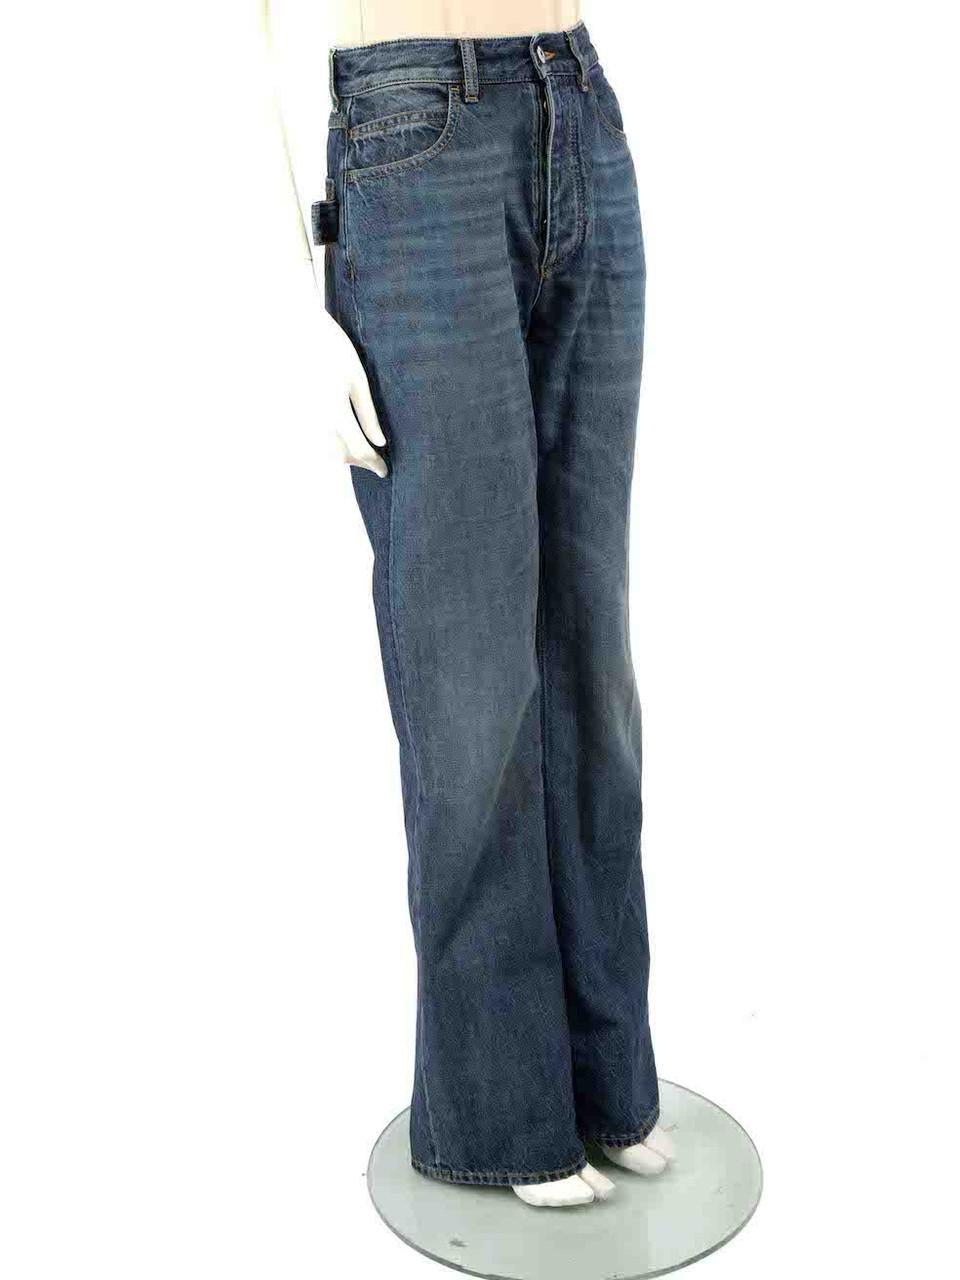 CONDITION is Very good. Minimal wear to trousers is evident. Minimal wear to front right leg with a small mark on this used Bottega Veneta designer resale item.
 
 
 
 Details
 
 
 Blue
 
 Cotton
 
 Straight leg jeans
 
 High rise
 
 Front button up